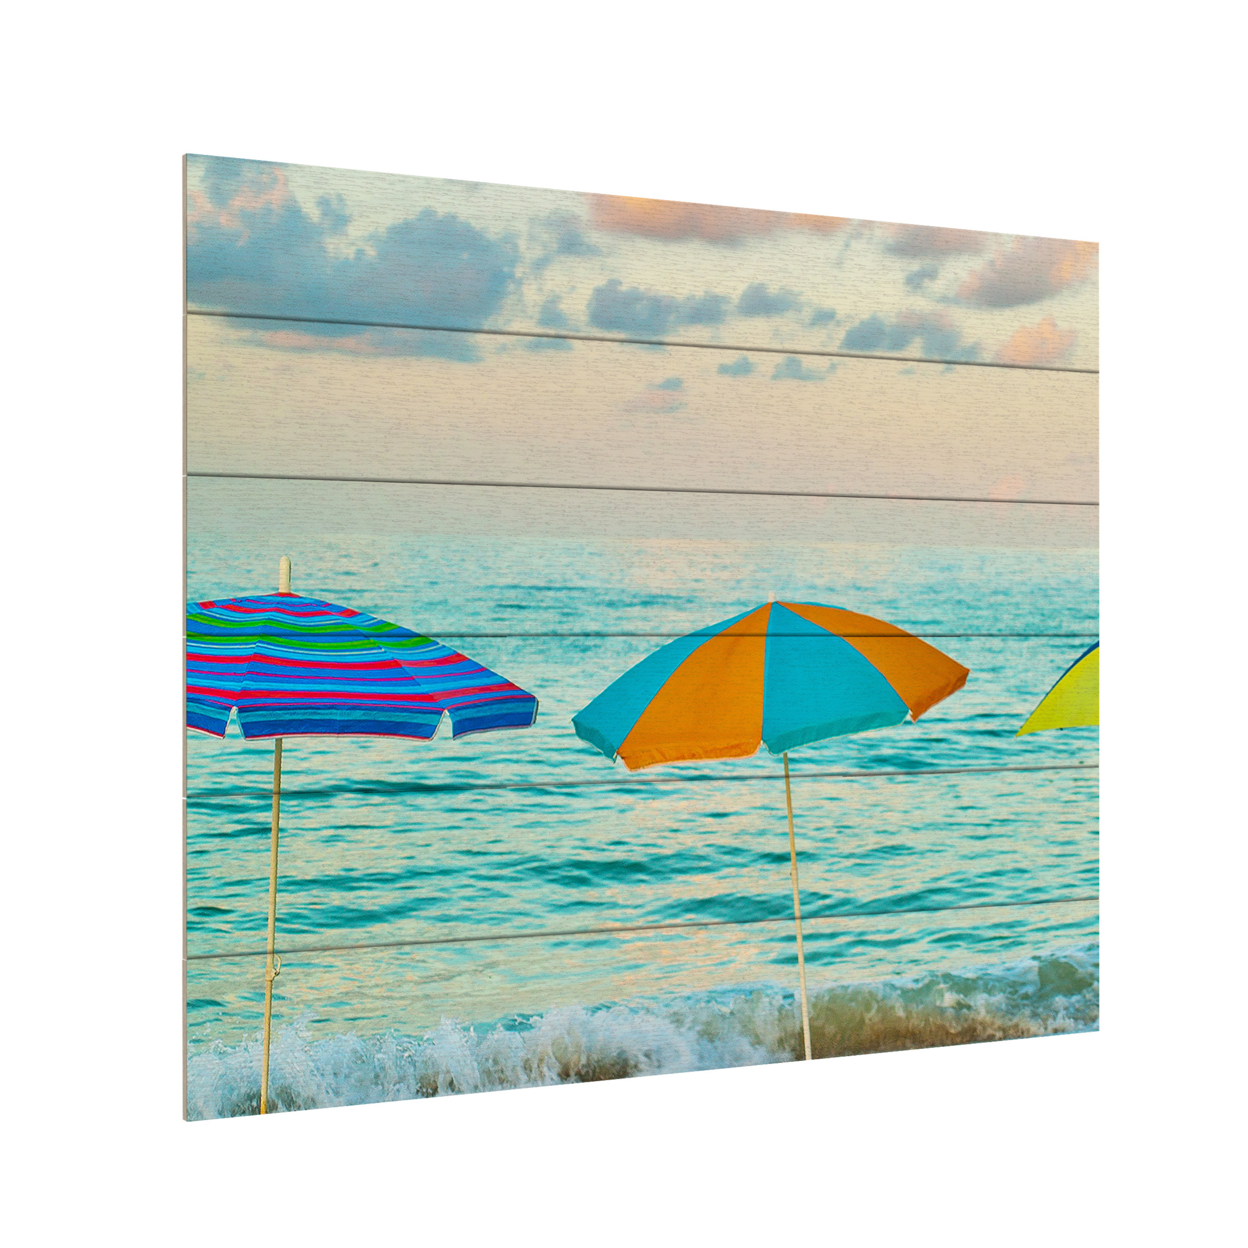 Wooden Slat Art 18 X 22 Inches Titled Florida Party Of Five Ready To Hang Home Decor Picture